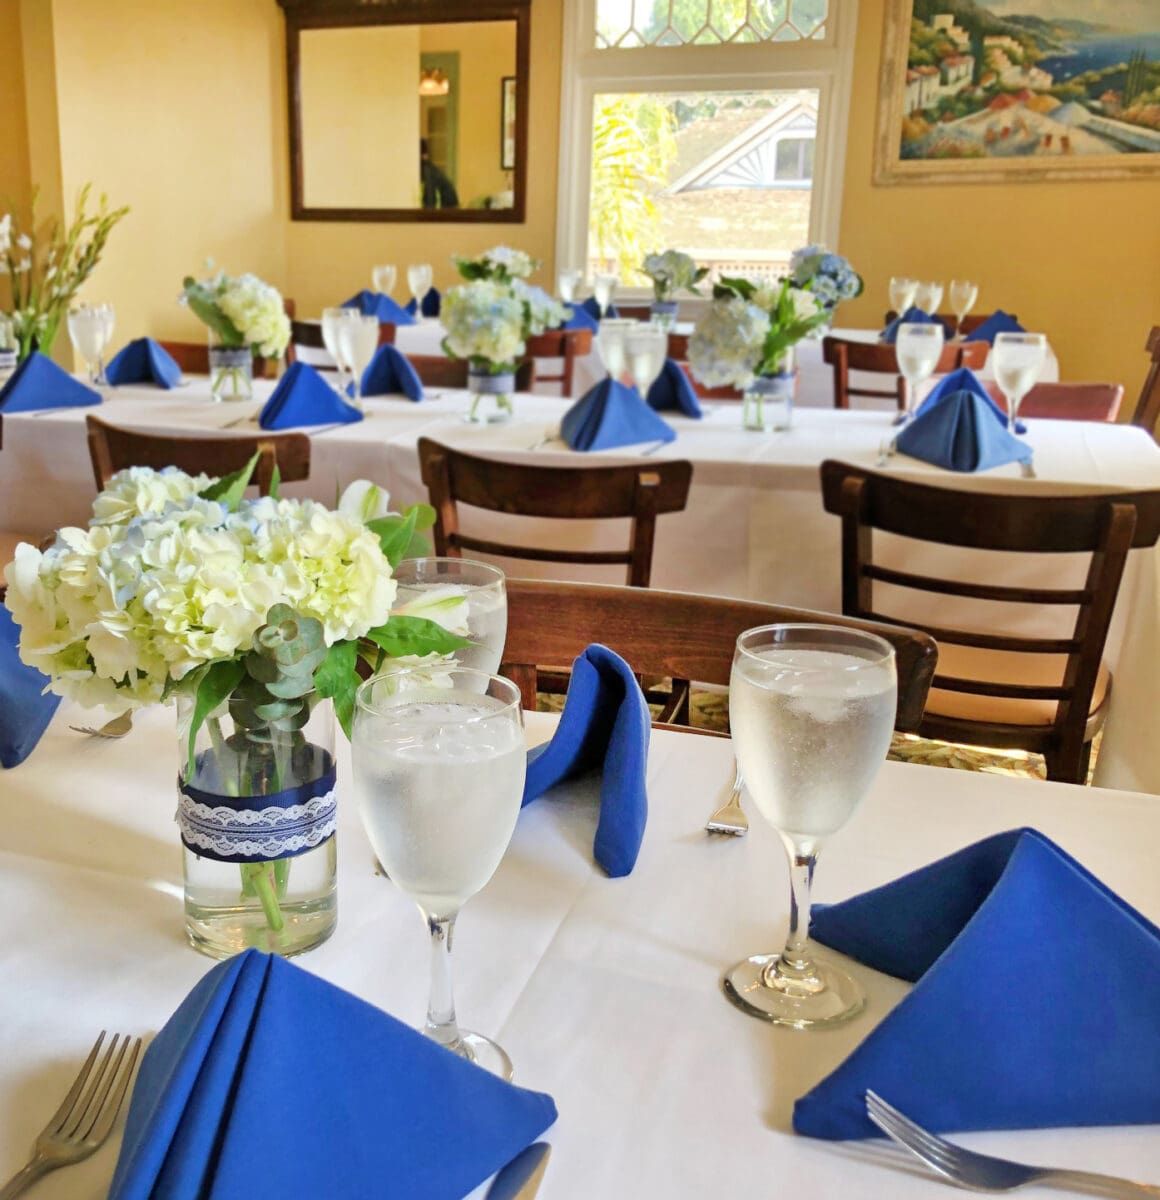 Elegant dining setup with blue napkins, white tablecloths, floral centerpieces, and glasses of water, in a room with bright windows and paintings at Heritage Square.